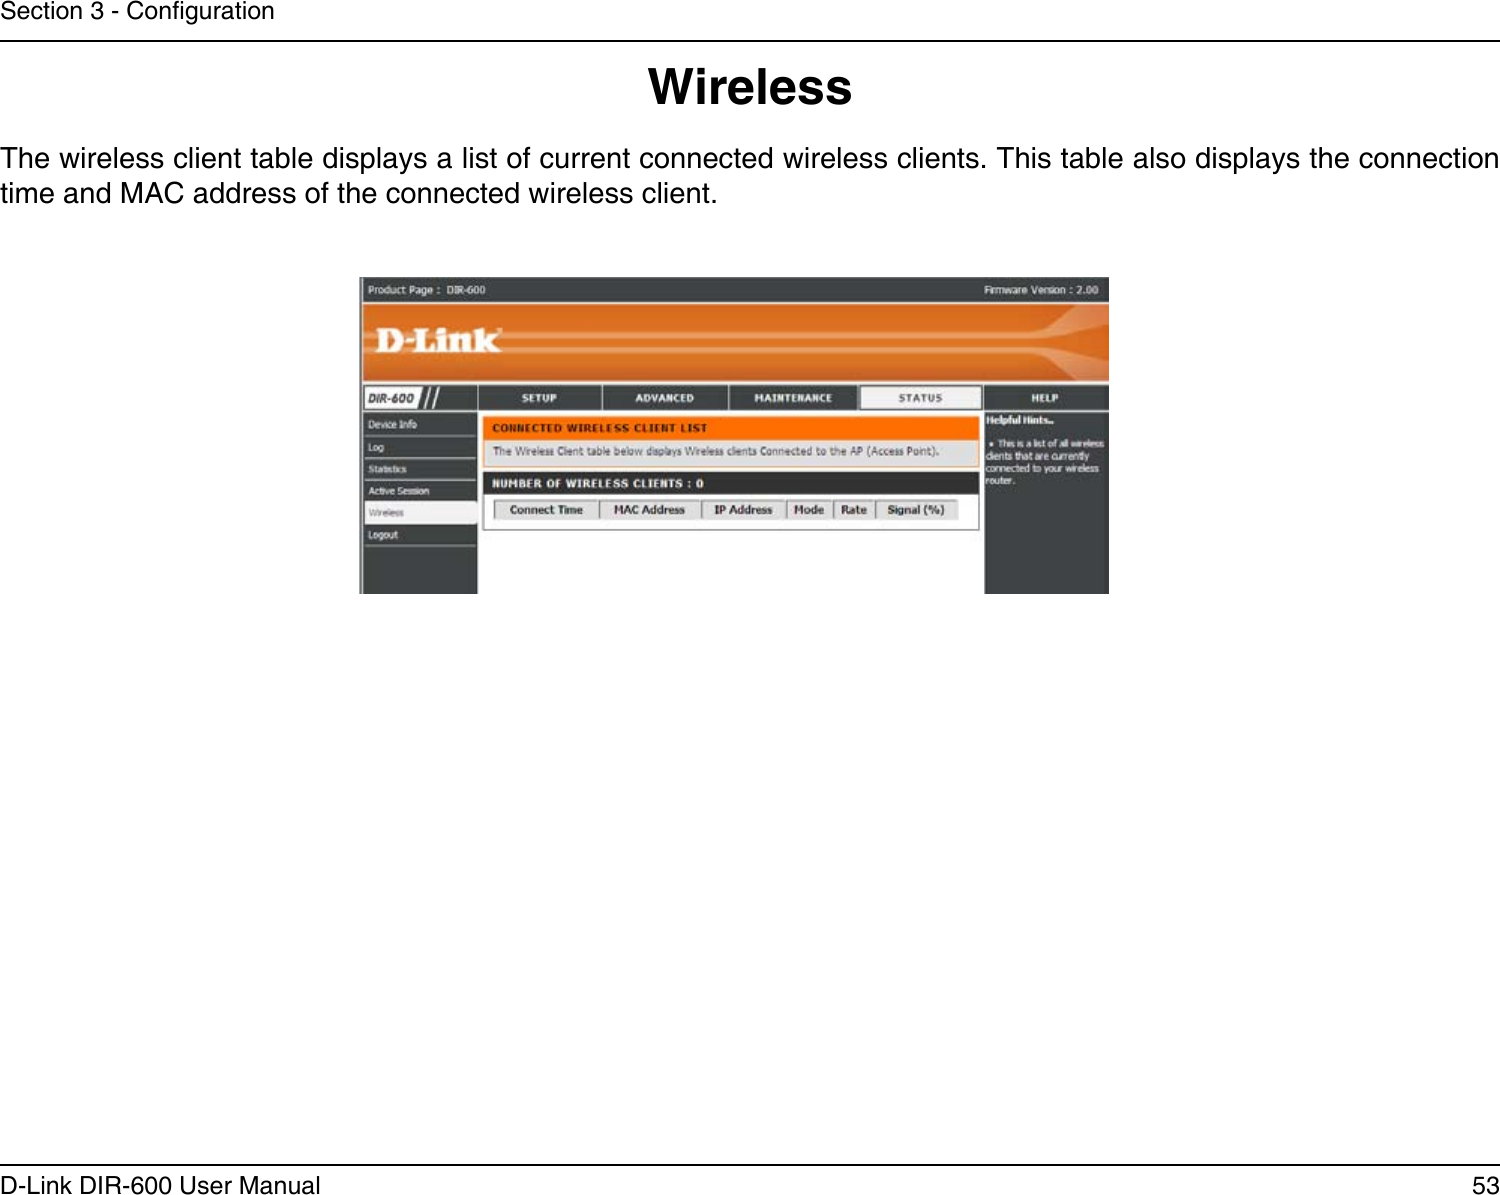 53D-Link DIR-600 User ManualSection 3 - CongurationWirelessThe wireless client table displays a list of current connected wireless clients. This table also displays the connection time and MAC address of the connected wireless client.